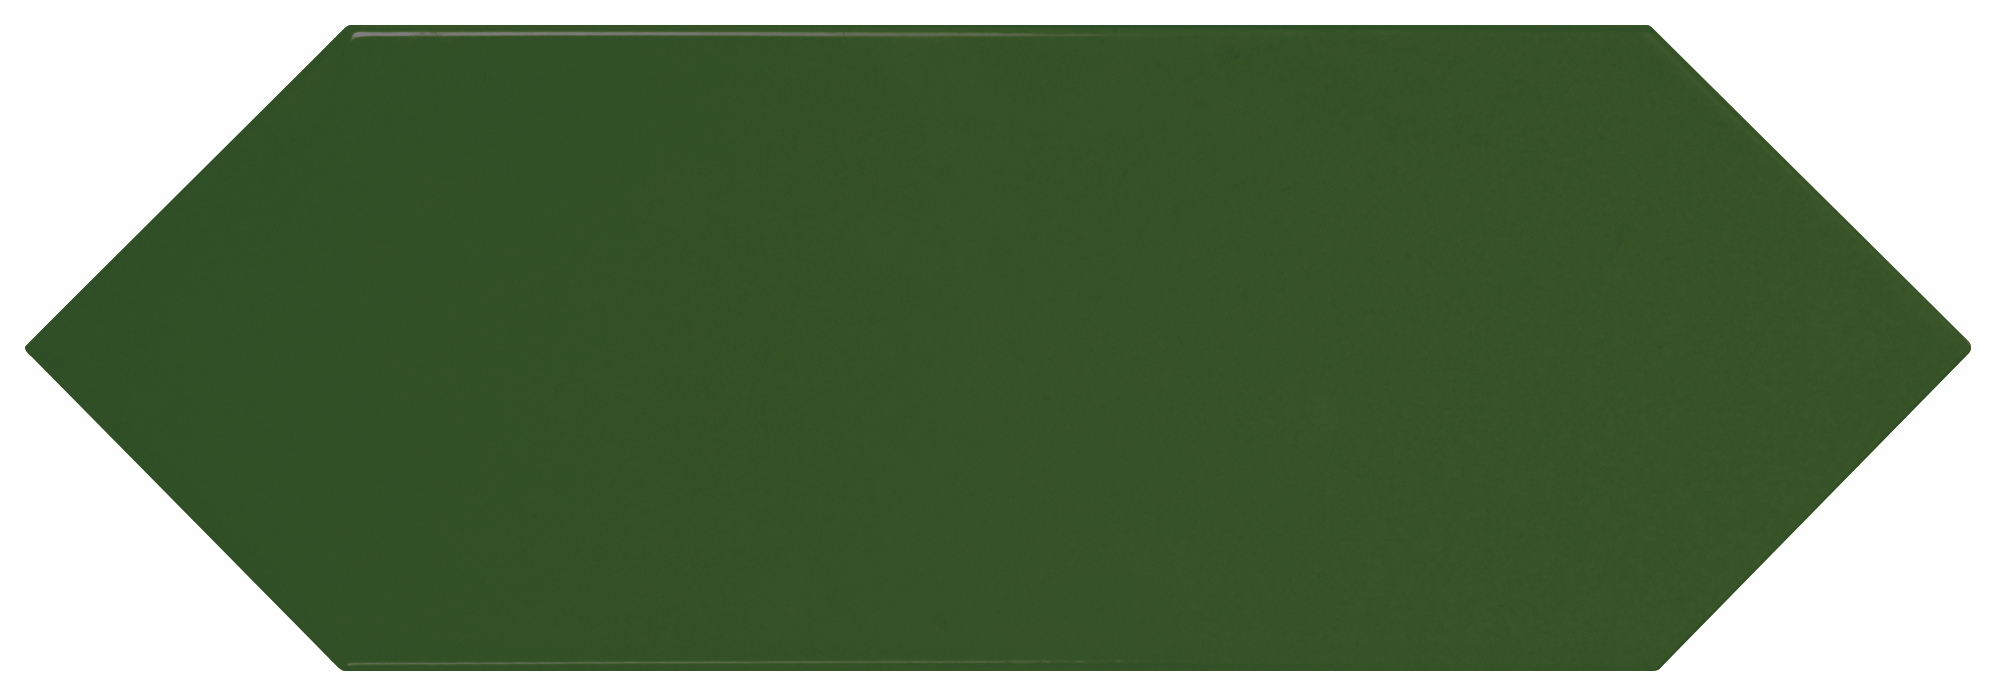 Wickes Boutique Clover Green Gloss Ceramic Wall Tile - Cut Sample